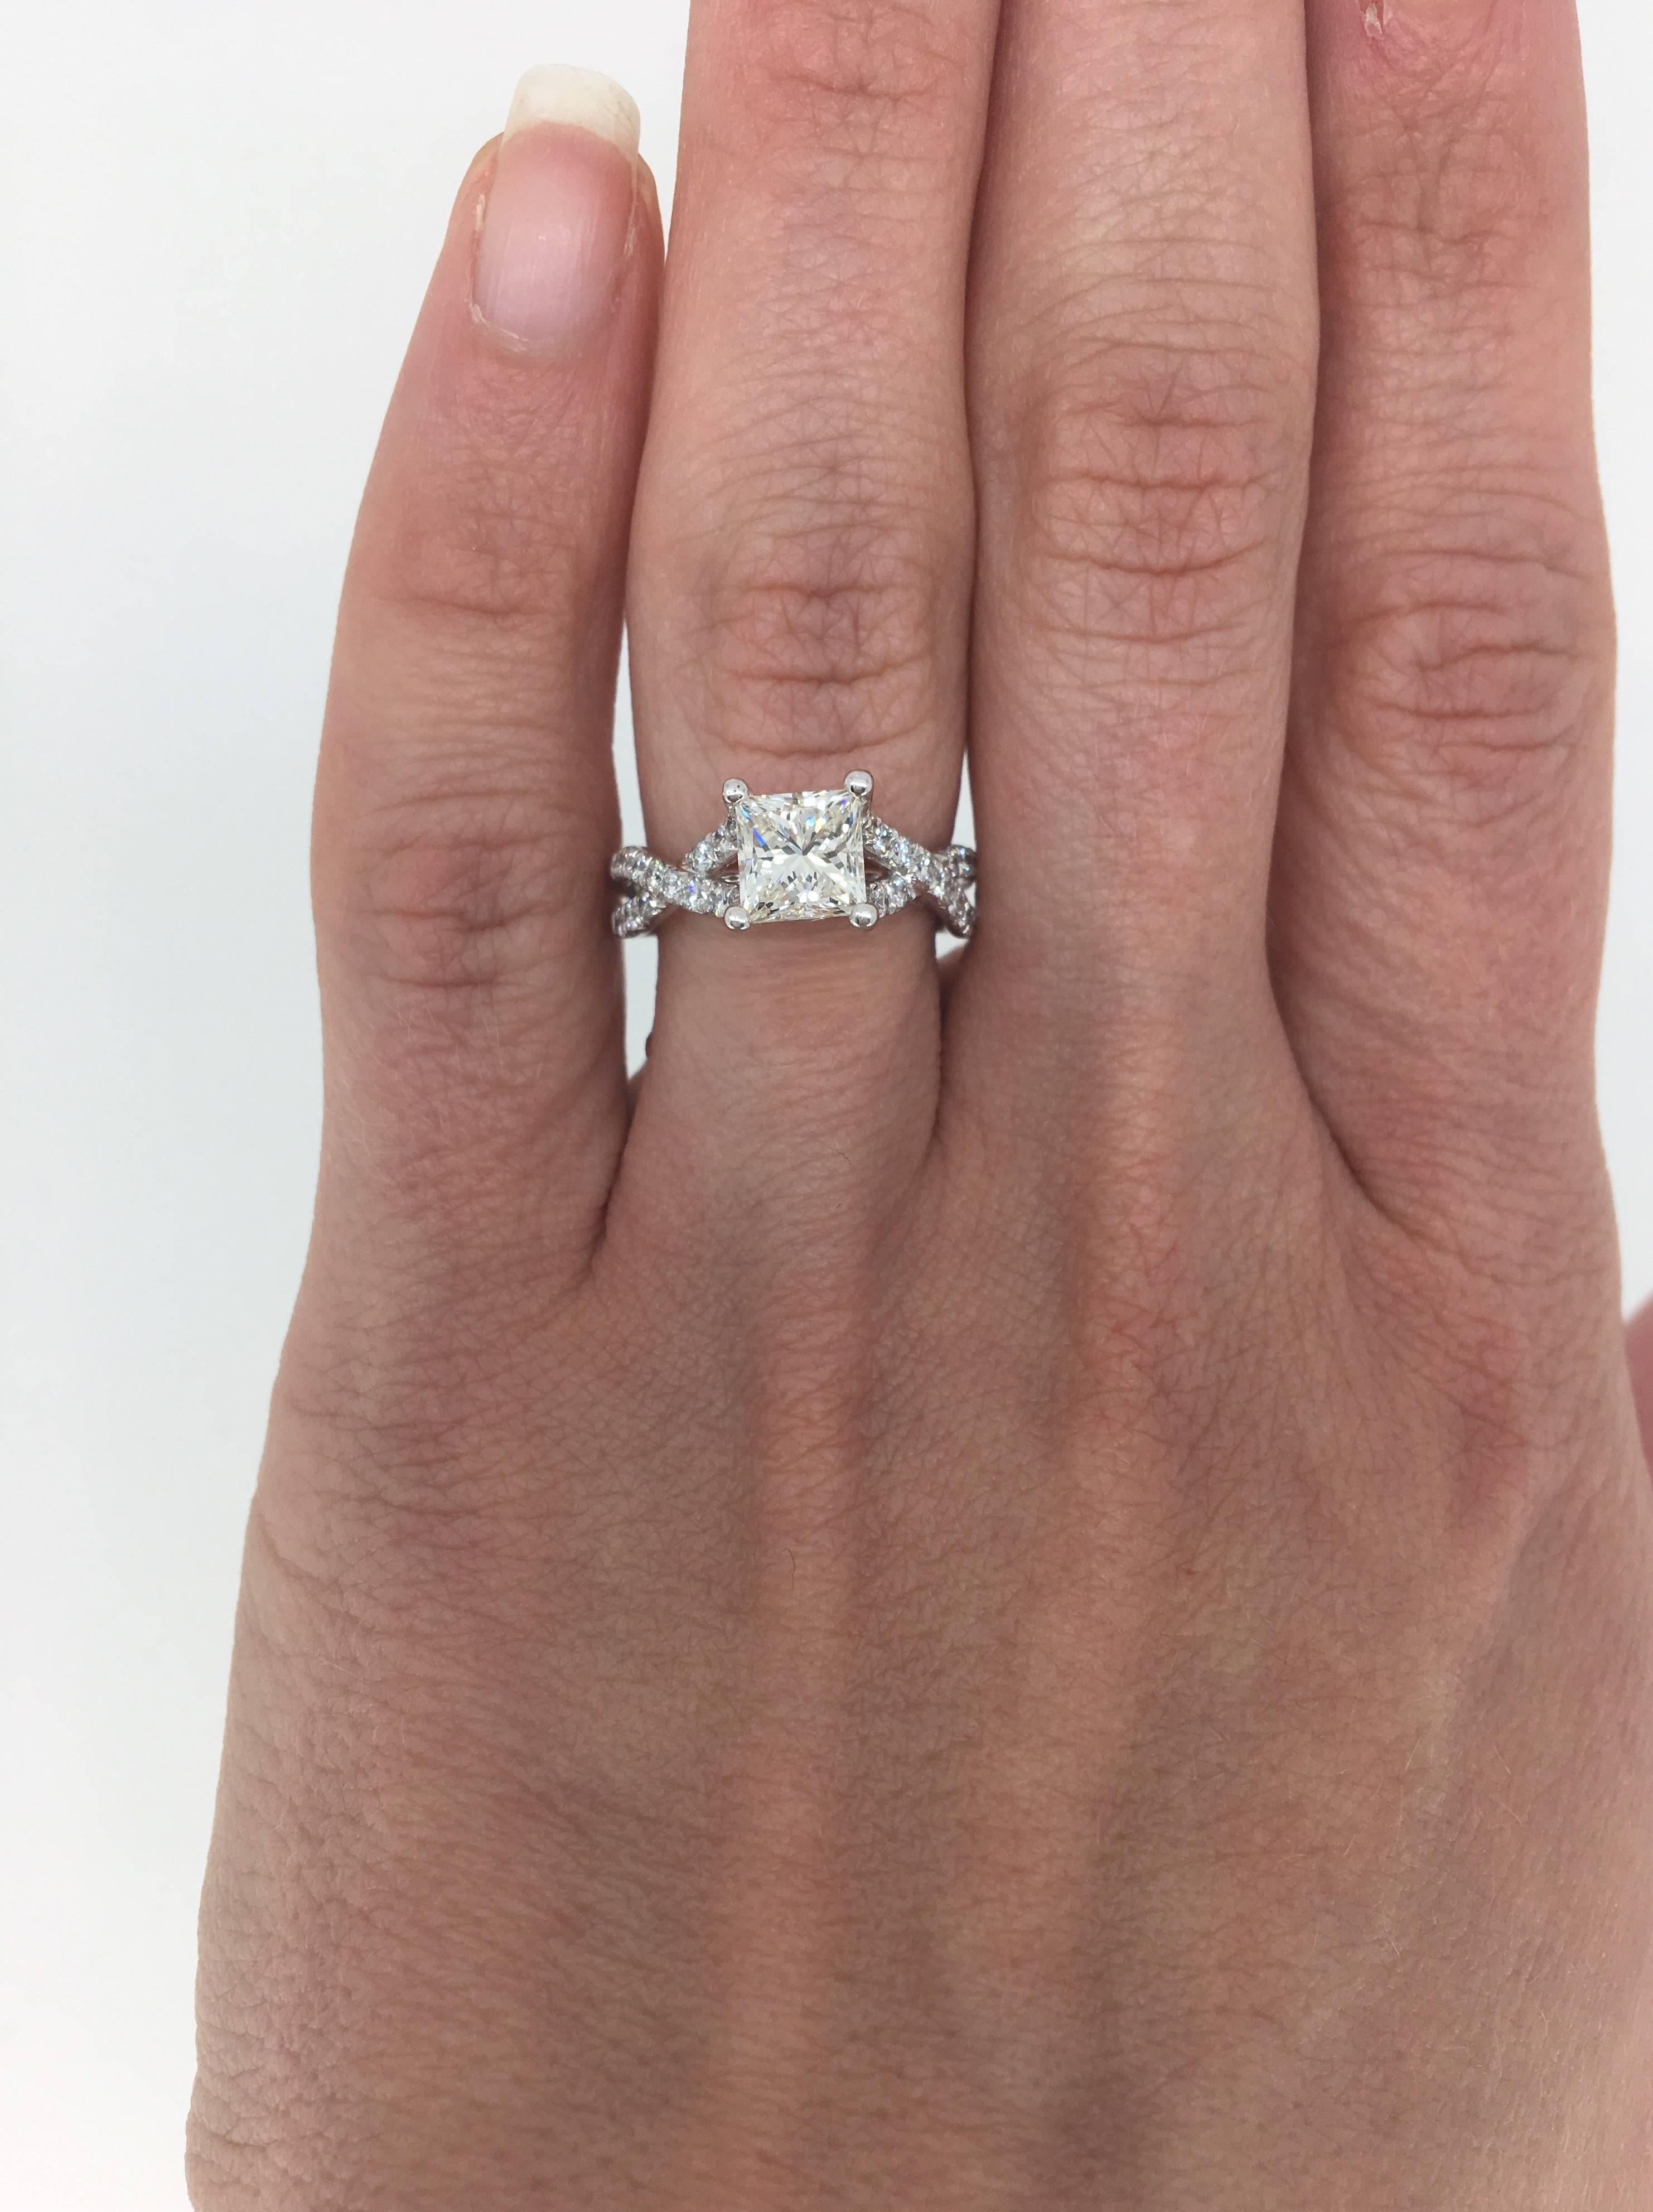 Verragio engagement ring in 18K White Gold with an approximate 1.23ct Princess cut  center diamond. The diamond has K-L color and  VS clarity. There are 28 additional Round Brilliant Cut Diamonds cascading down the beautiful split shank. To add a